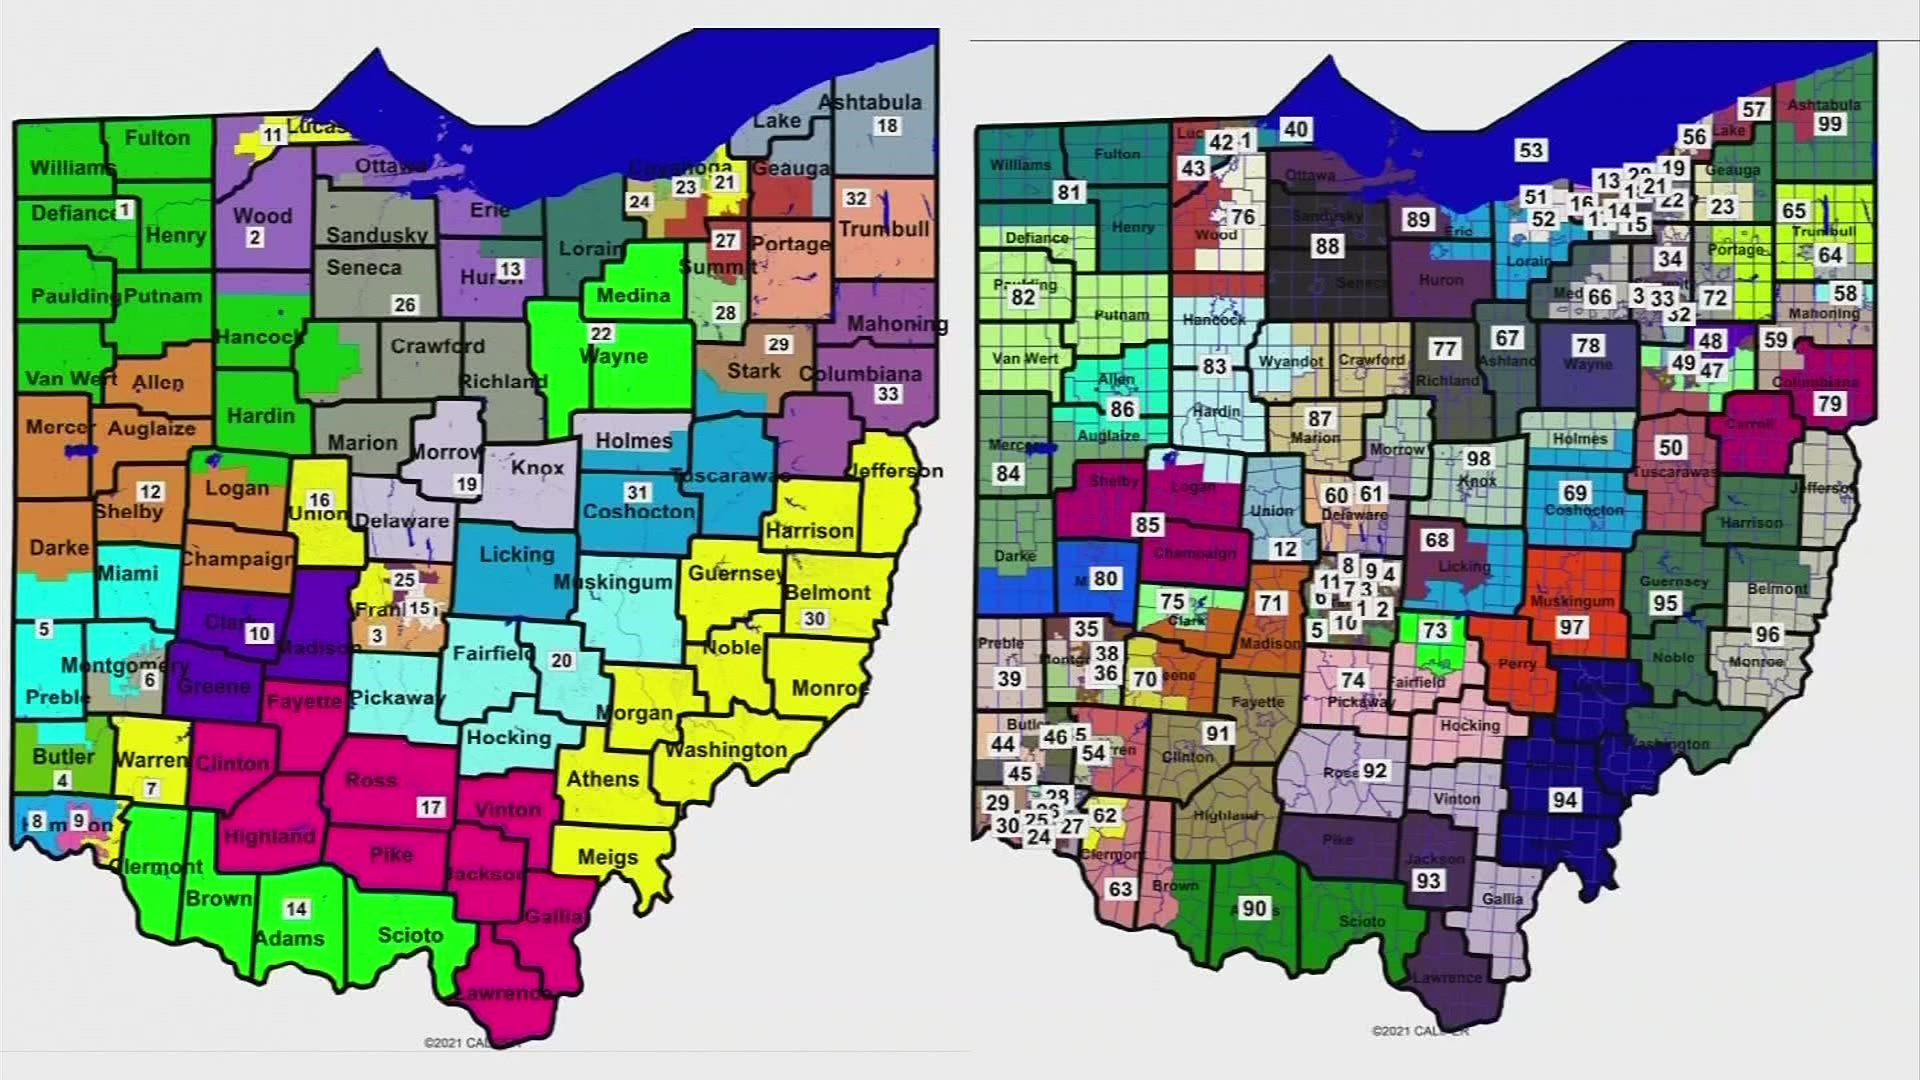 The court ordered the Ohio Redistricting Commission to adopt a new plan and file it with the Ohio Secretary of State’s office by Feb. 17.